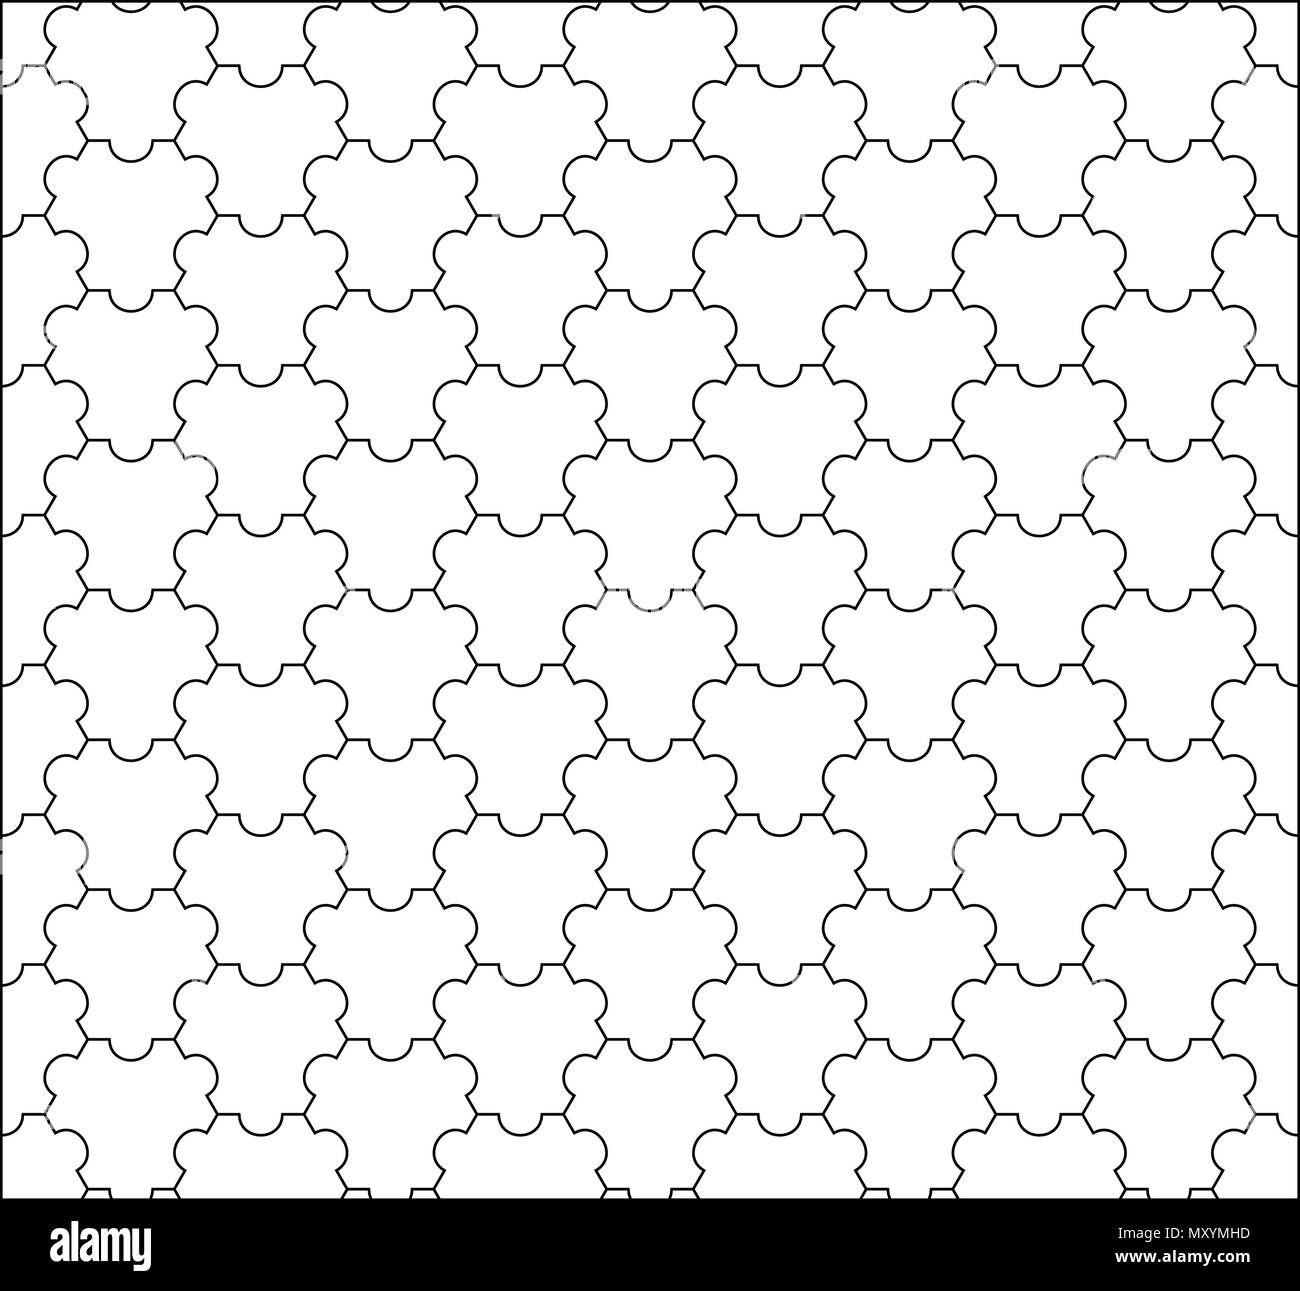 Tessellation black and white stock photos images